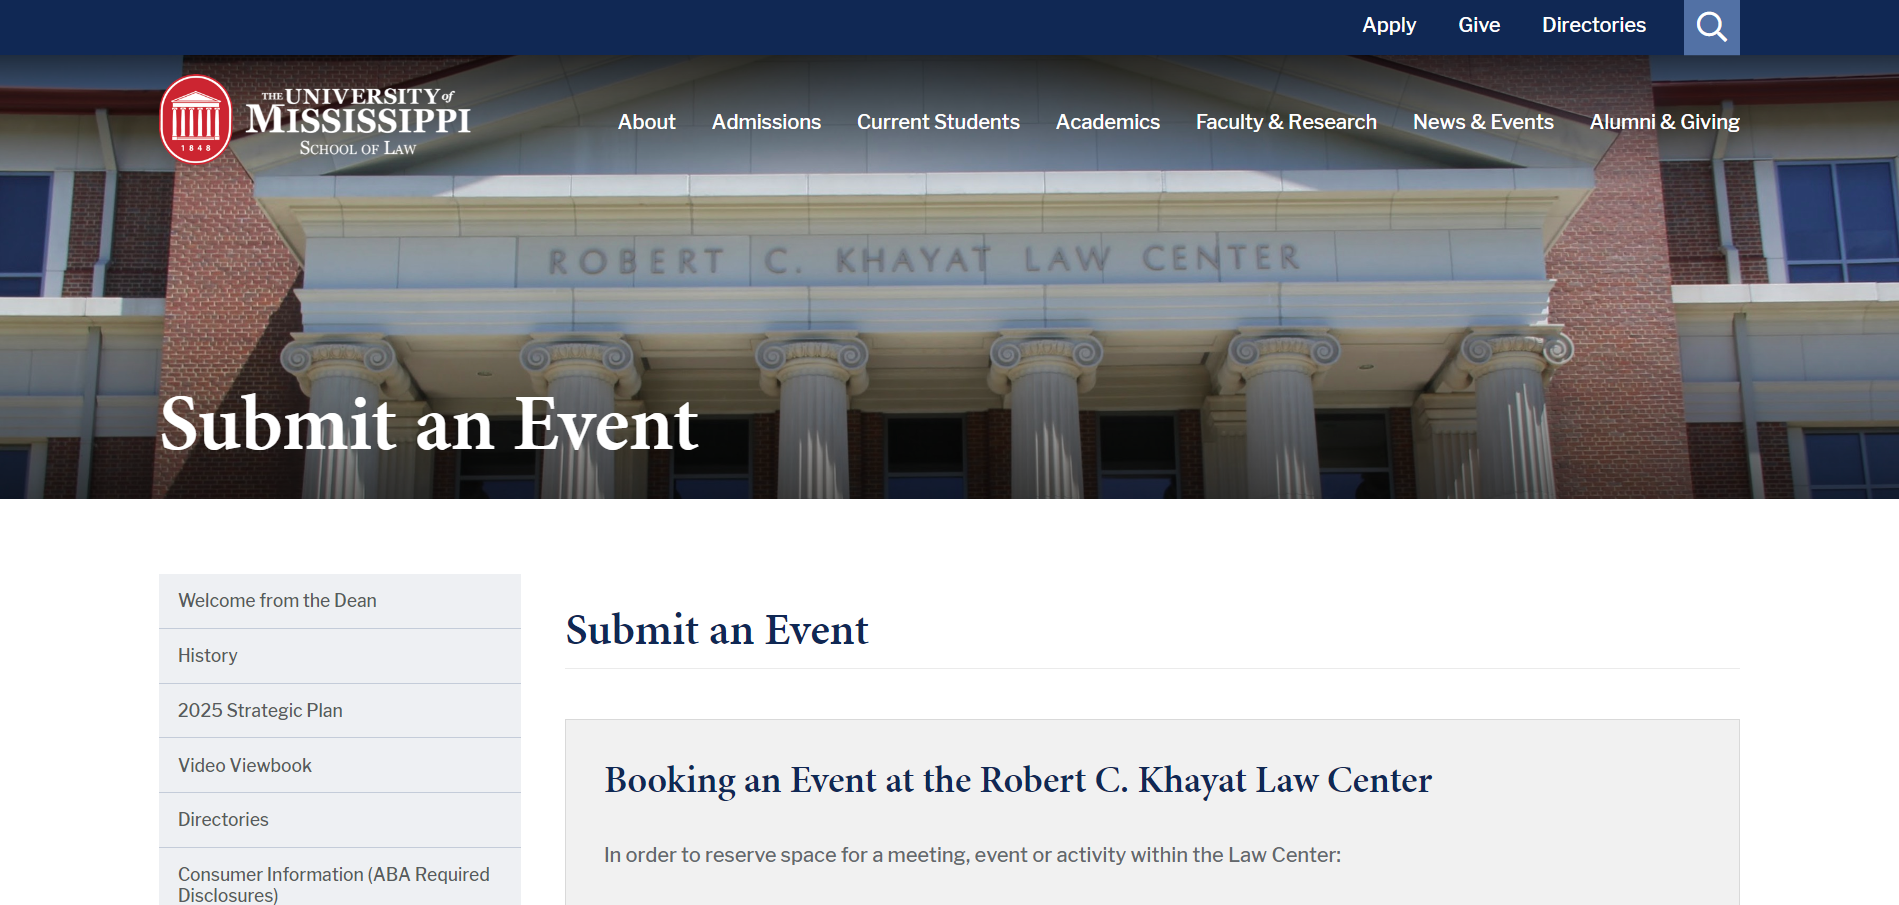 University of Mississippi Submit An Event Page